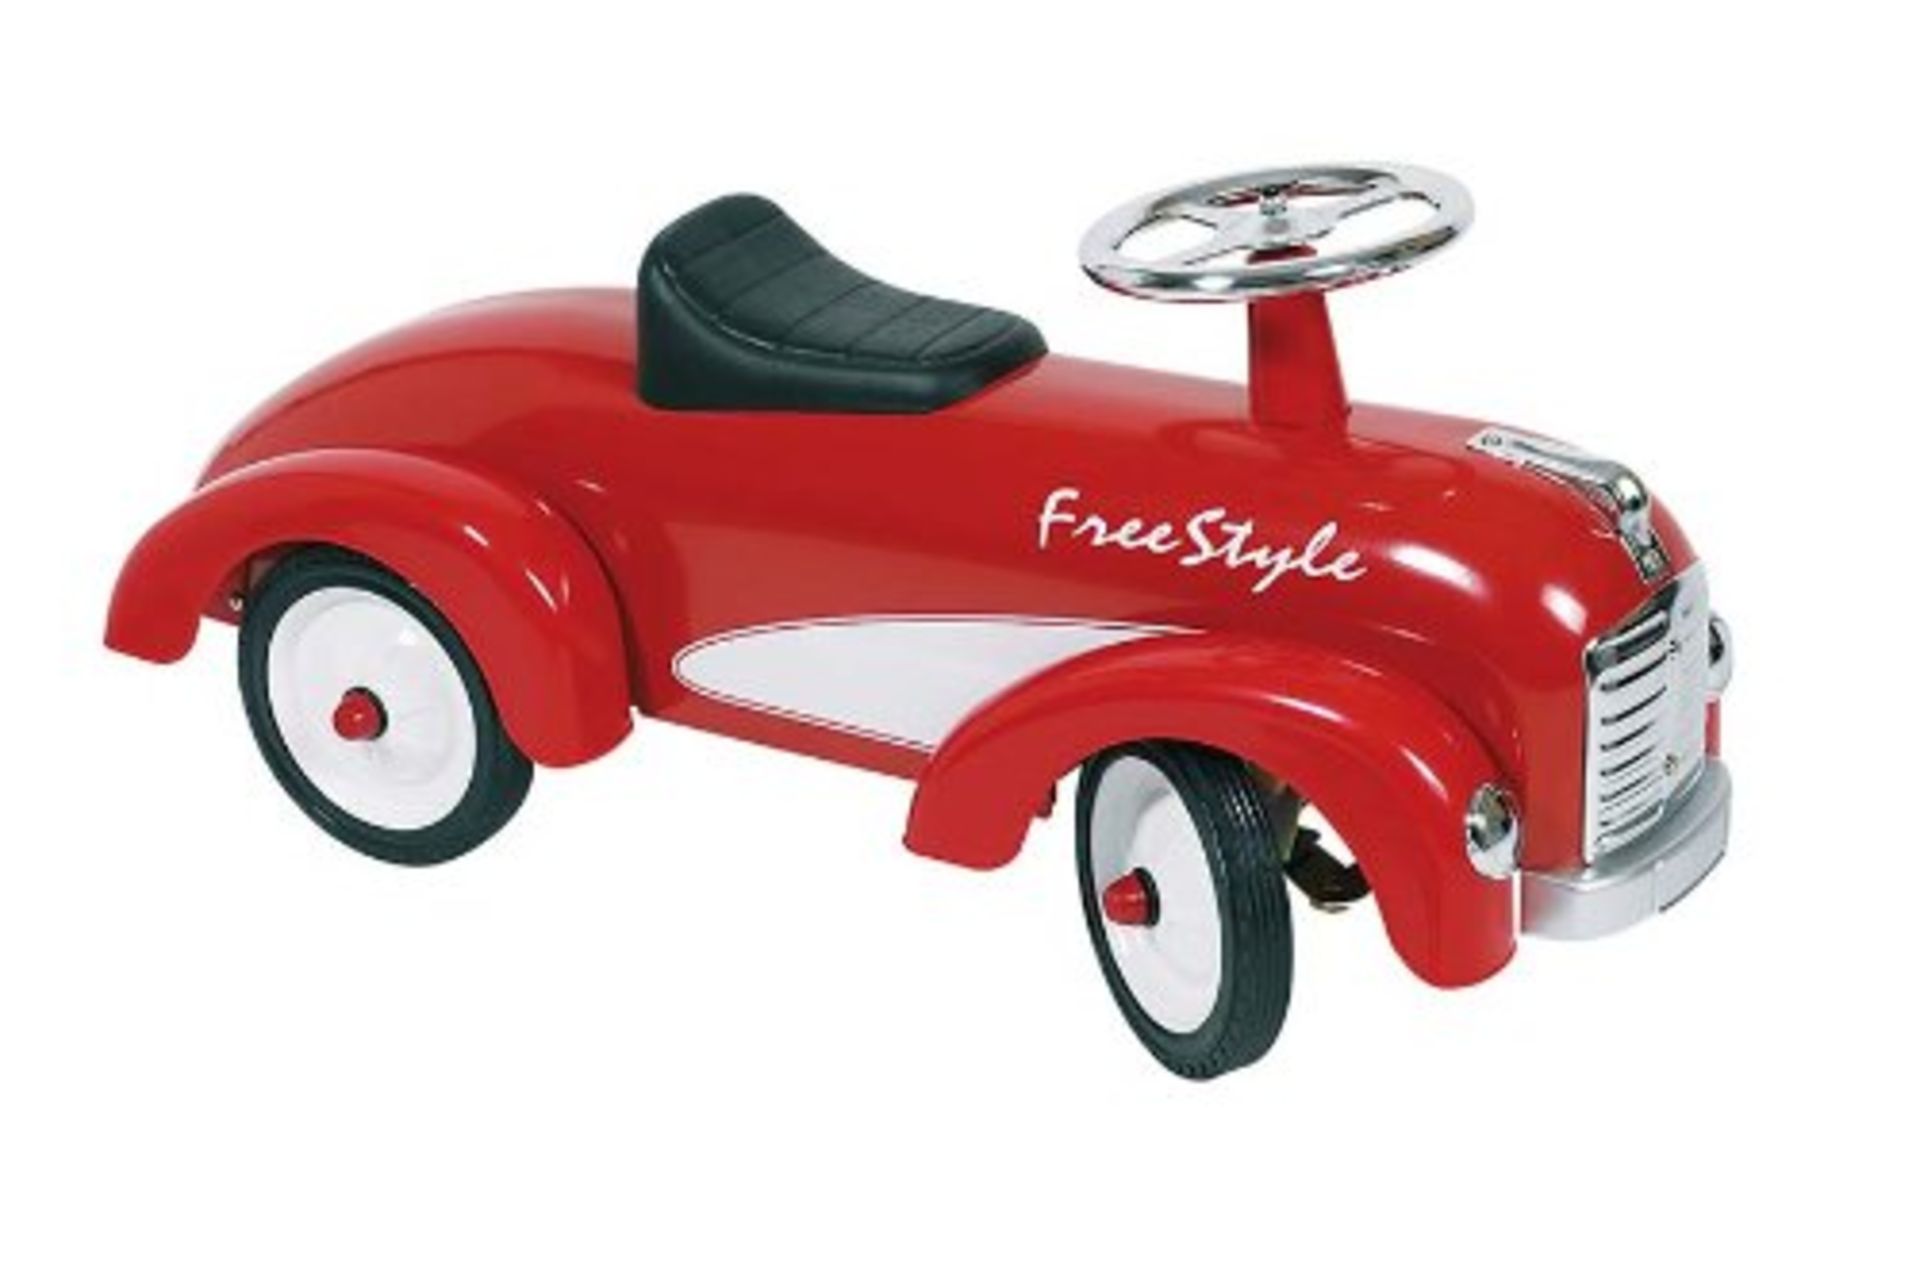 1 x Red Freestyle Metal Ride on Car | 4013594140874 | RRP £55.00